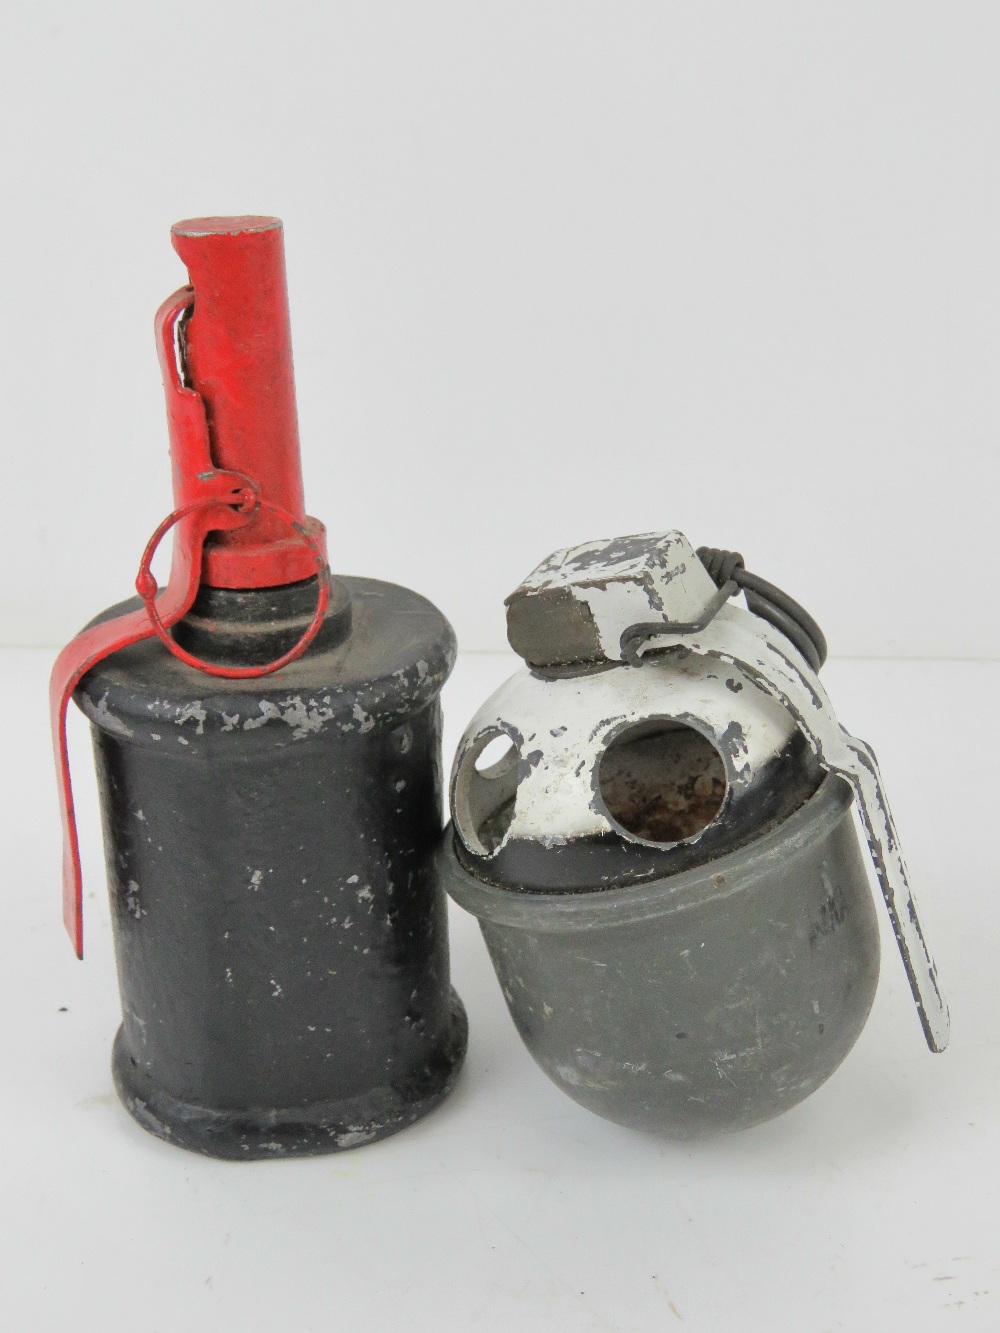 An inert Dutch training grenade with fuse and pin. Together with an inert Soviet RG42 drill grenade.